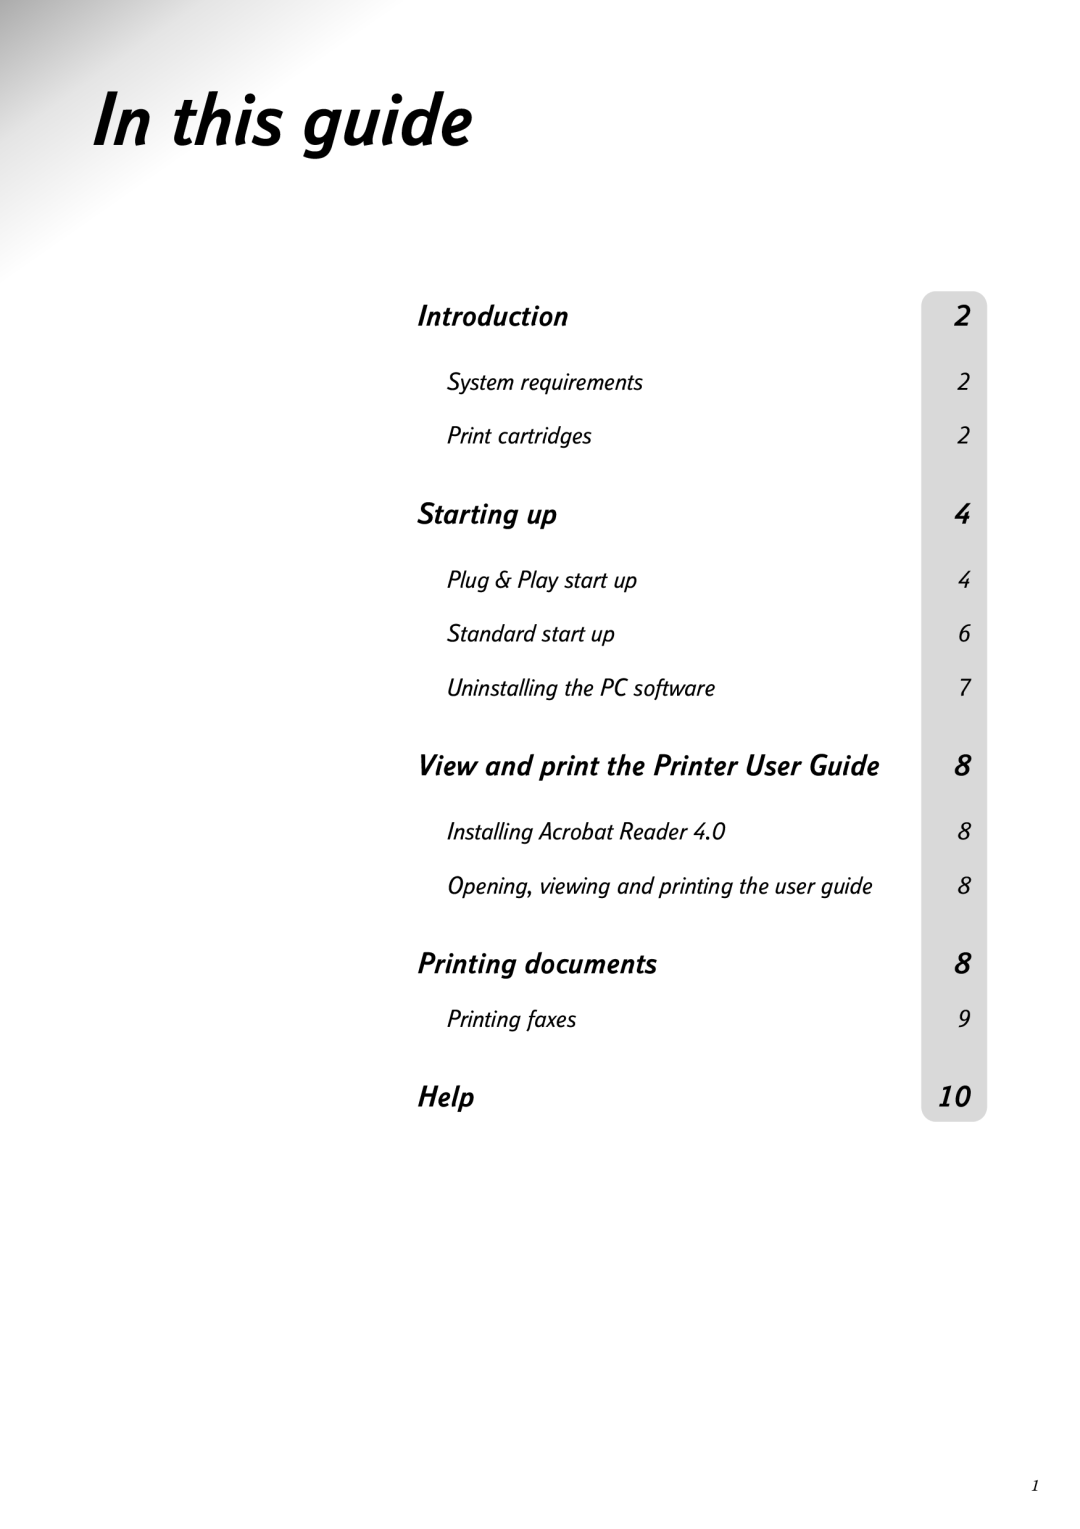 BT 65e manual In this guide, Introduction, Starting up, Printing documents, Help, View and print the Printer User Guide 